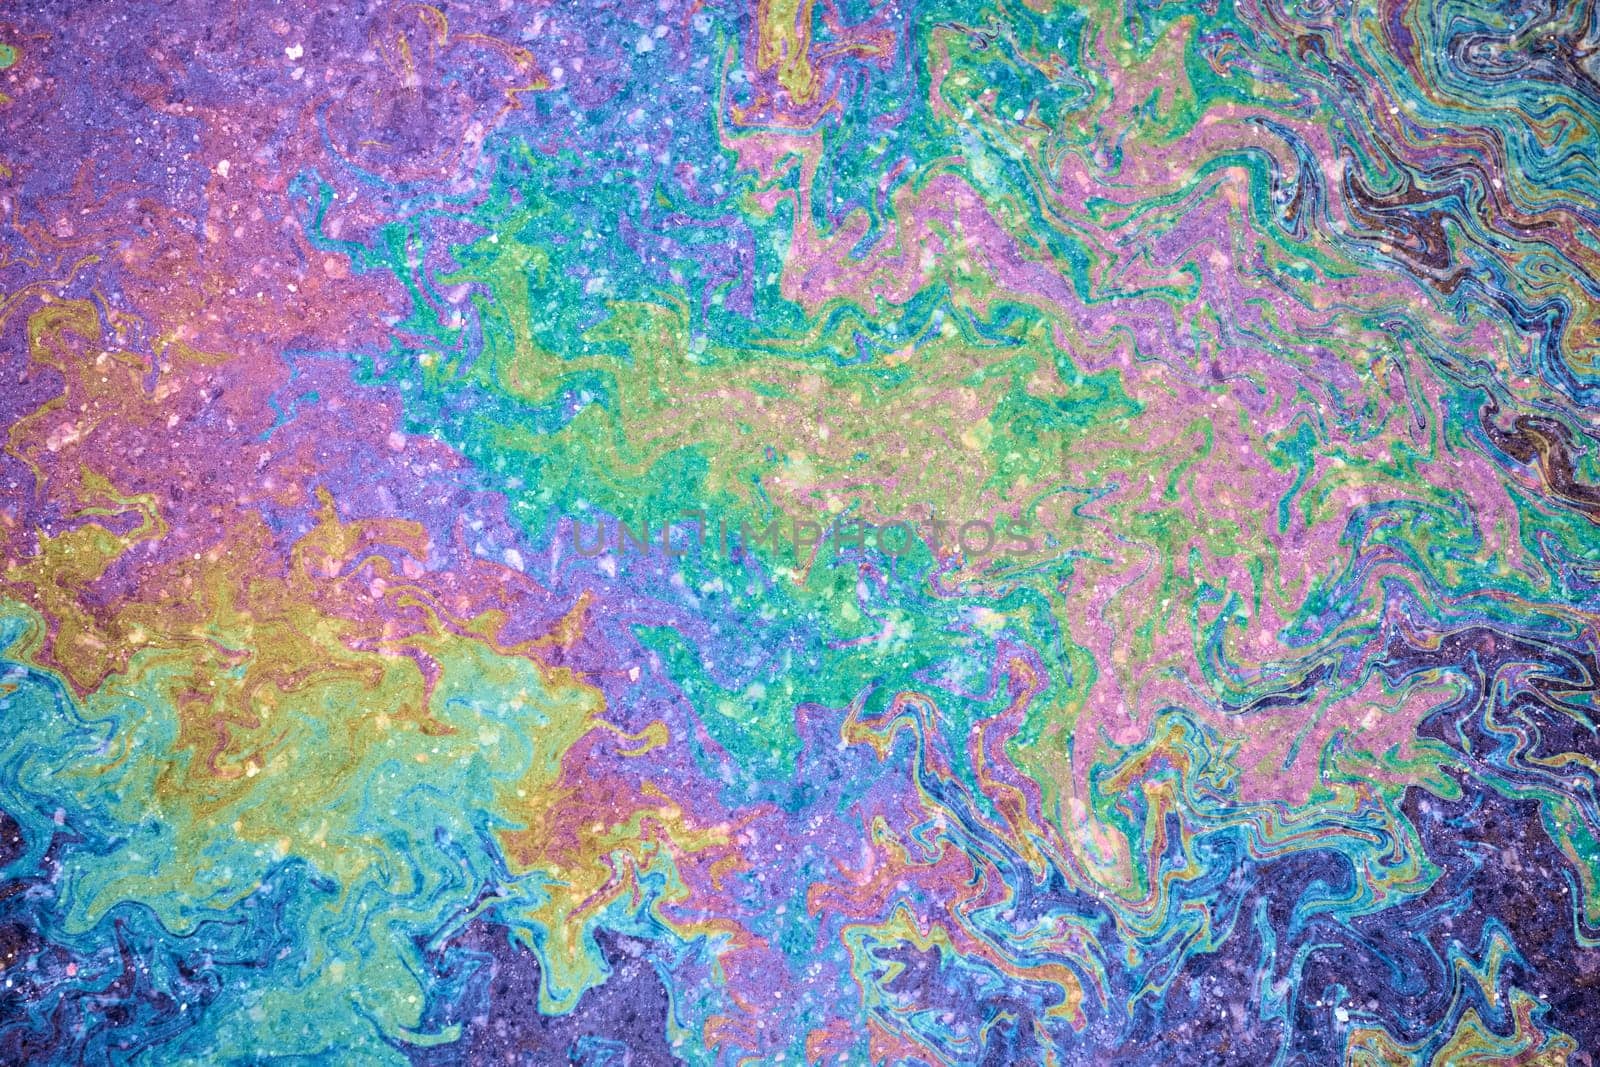 An overhead shot of the mesmerizing patterns created by leaking gasoline on wet ground